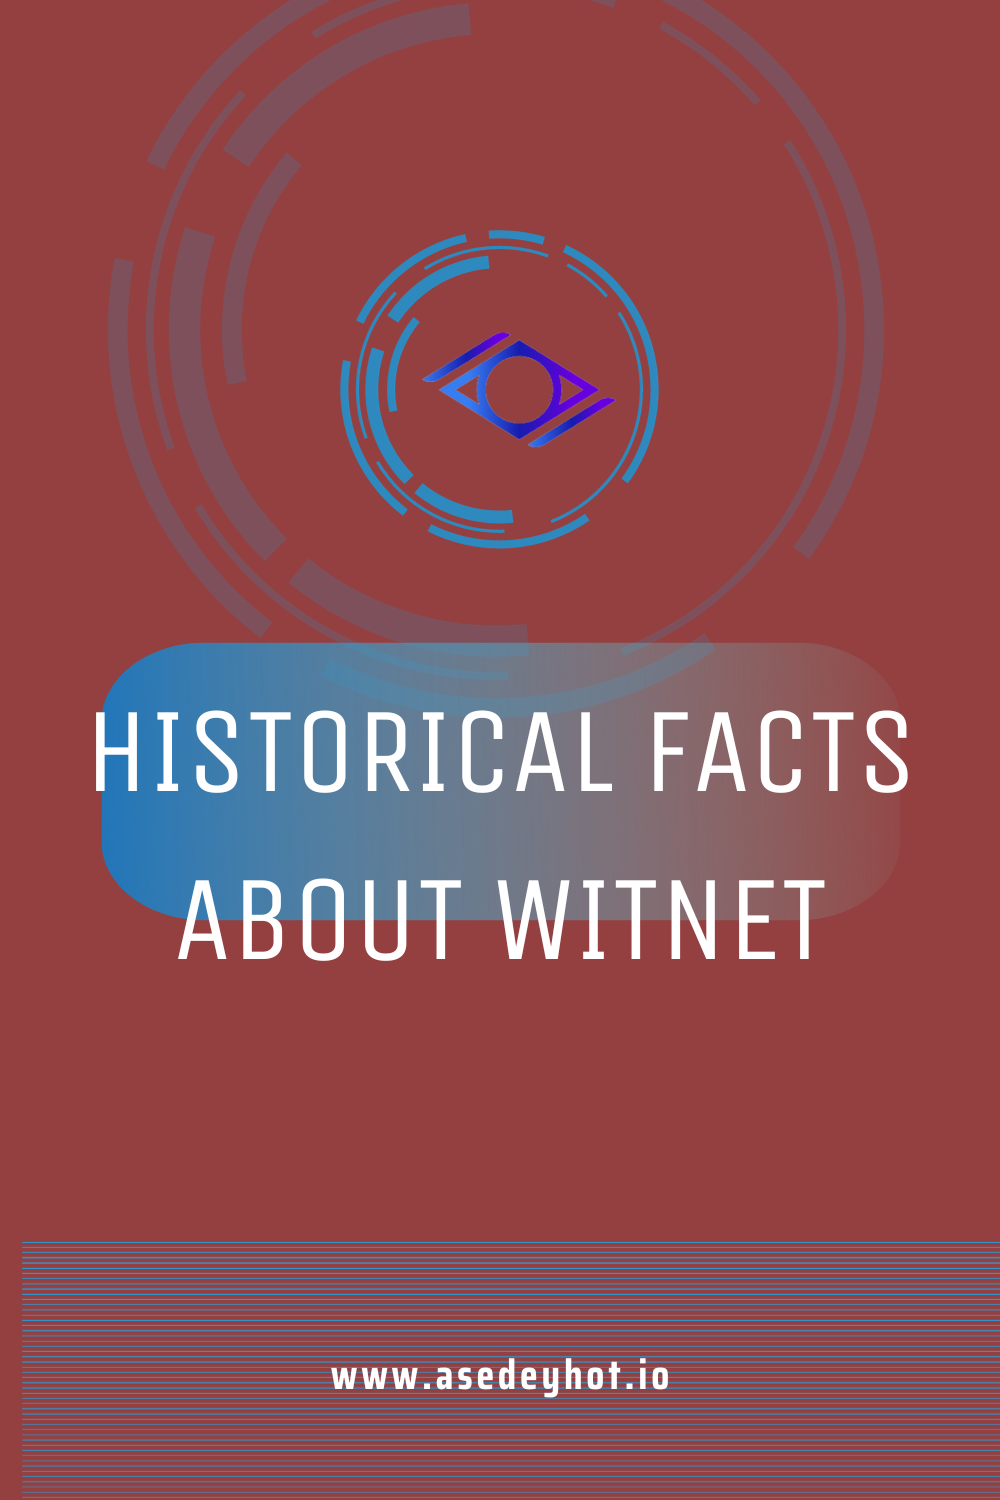 Historical Facts about Witnet